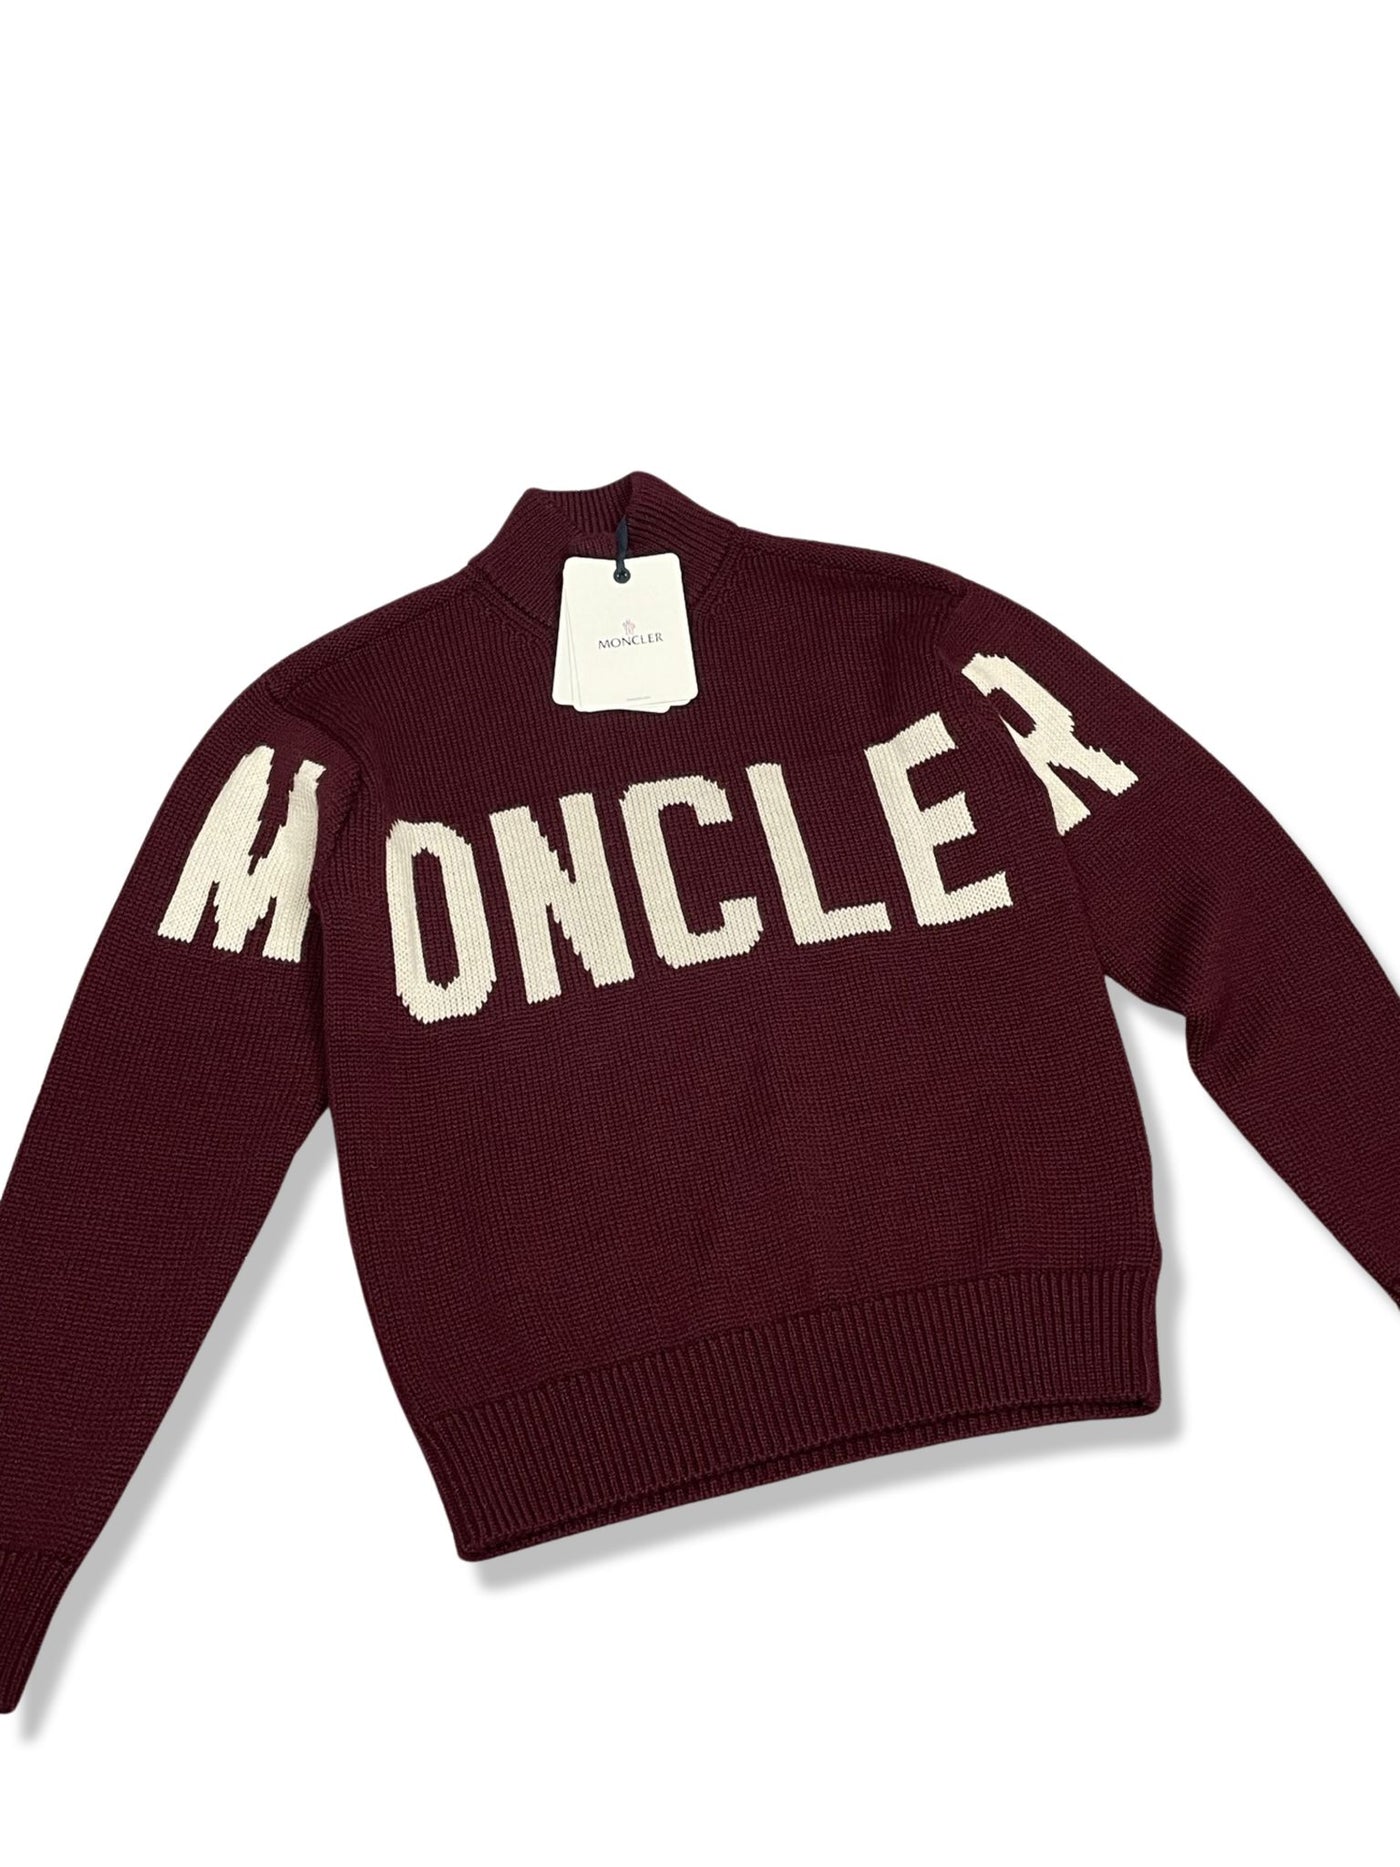 Moncler Maglione Tricot Sweater Burgundy New (Medium)